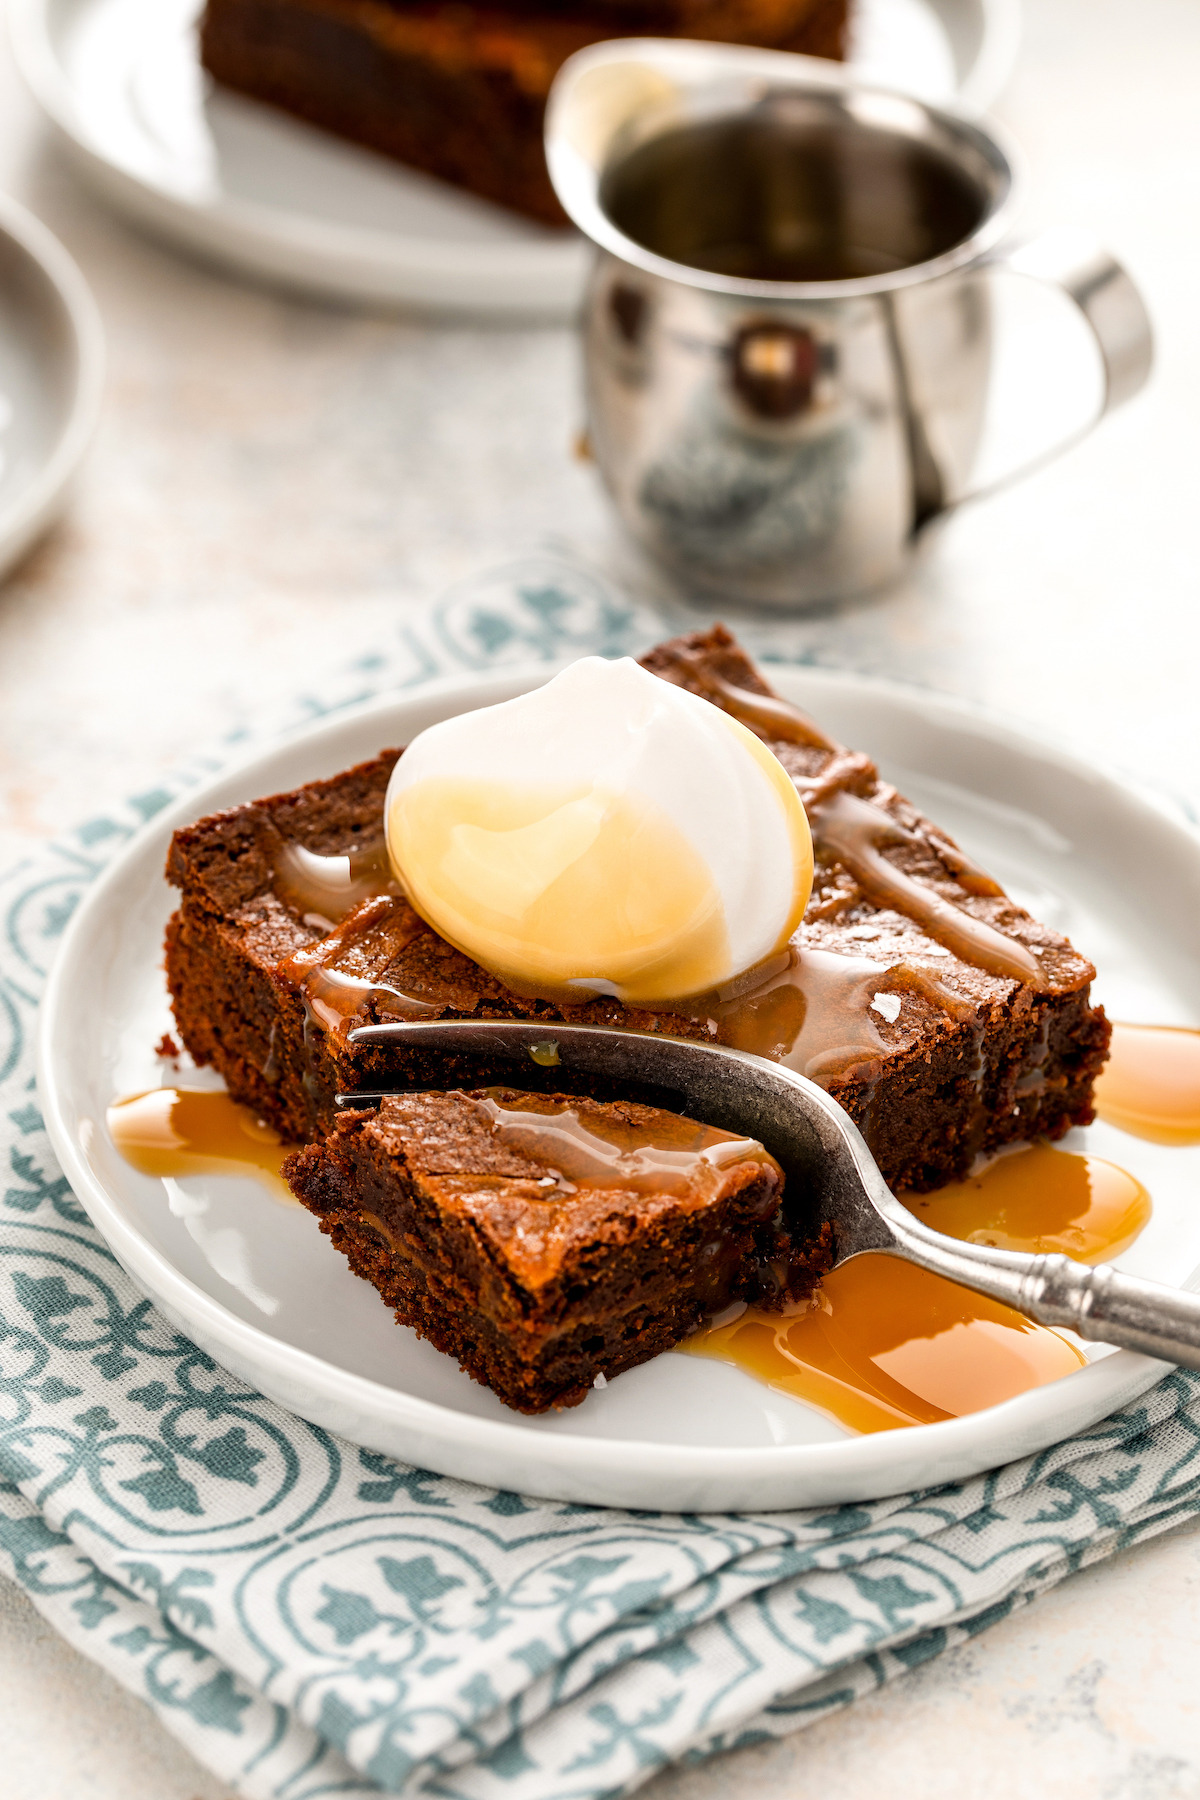 A sliced caramel brownie on a plate with fork cutting a bite.